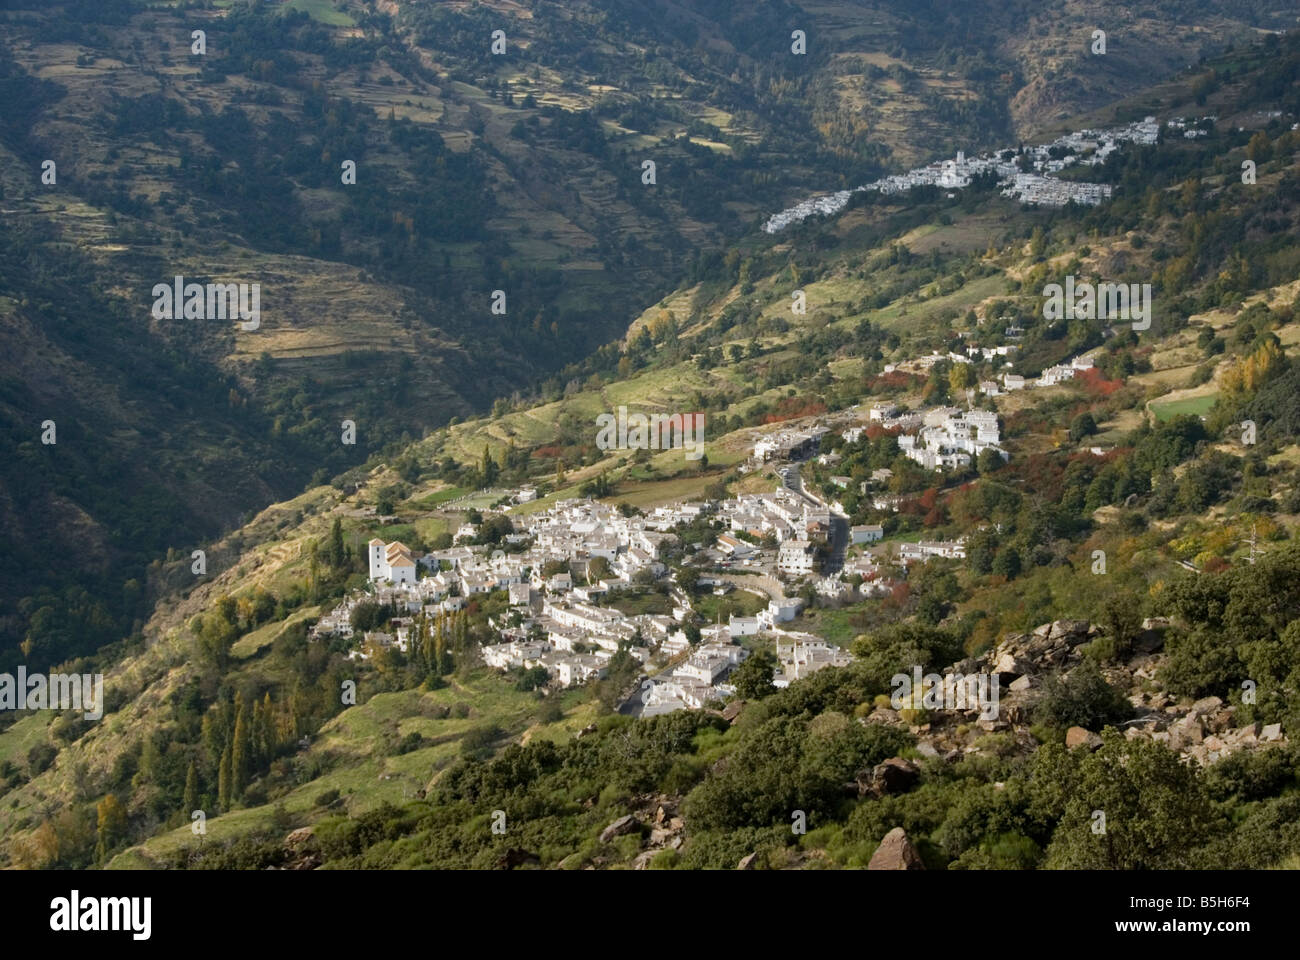 Whitewashed Andalusian villages of Bubion bottom and Capileira in the Sierra Nevada mountain range Alpujarra Spain Stock Photo